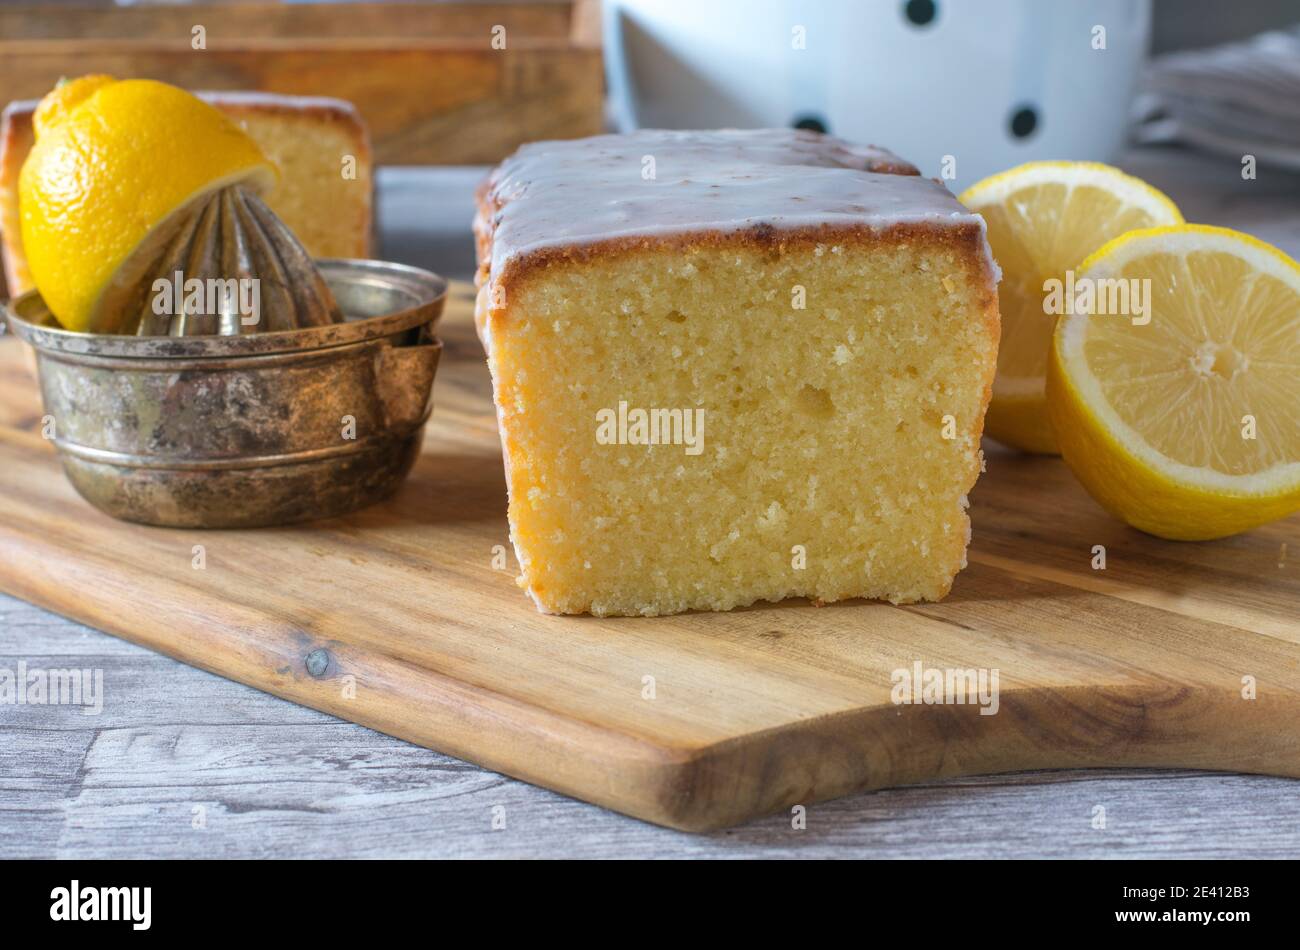 Delicious lemon cake with frosting on wooden board with rustic kitchen utensils Stock Photo